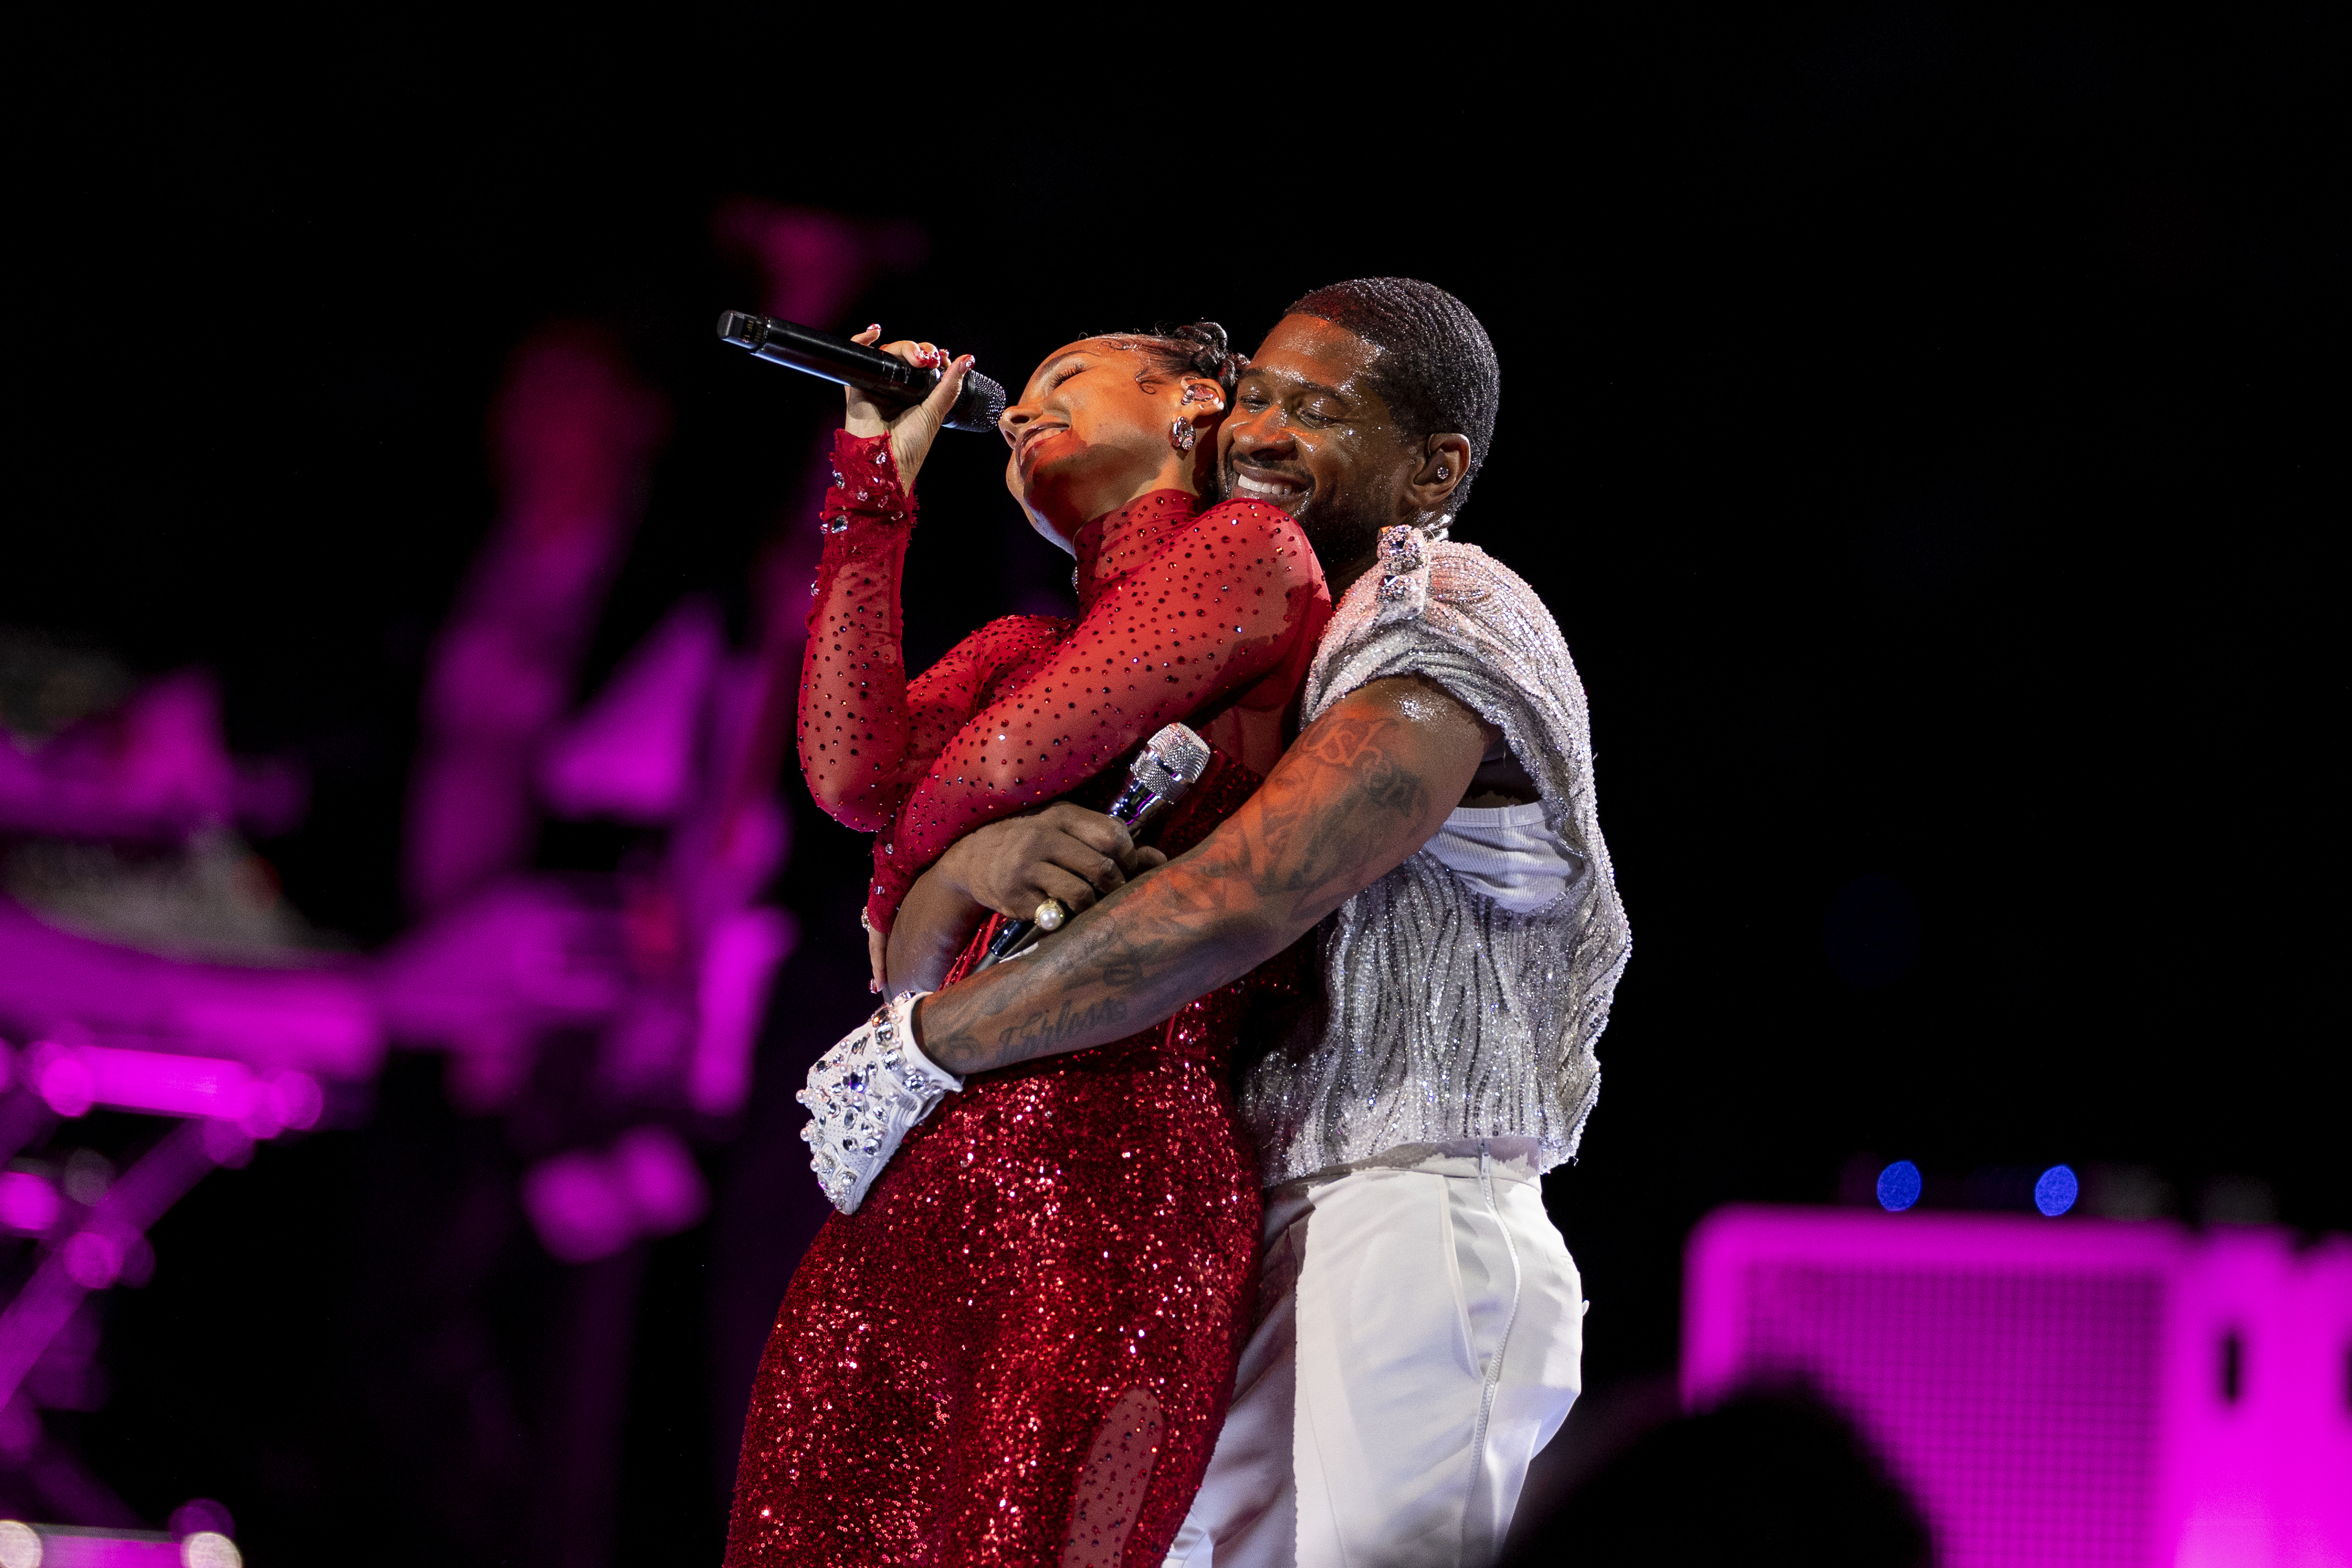 Usher and Alicia Keys performing together